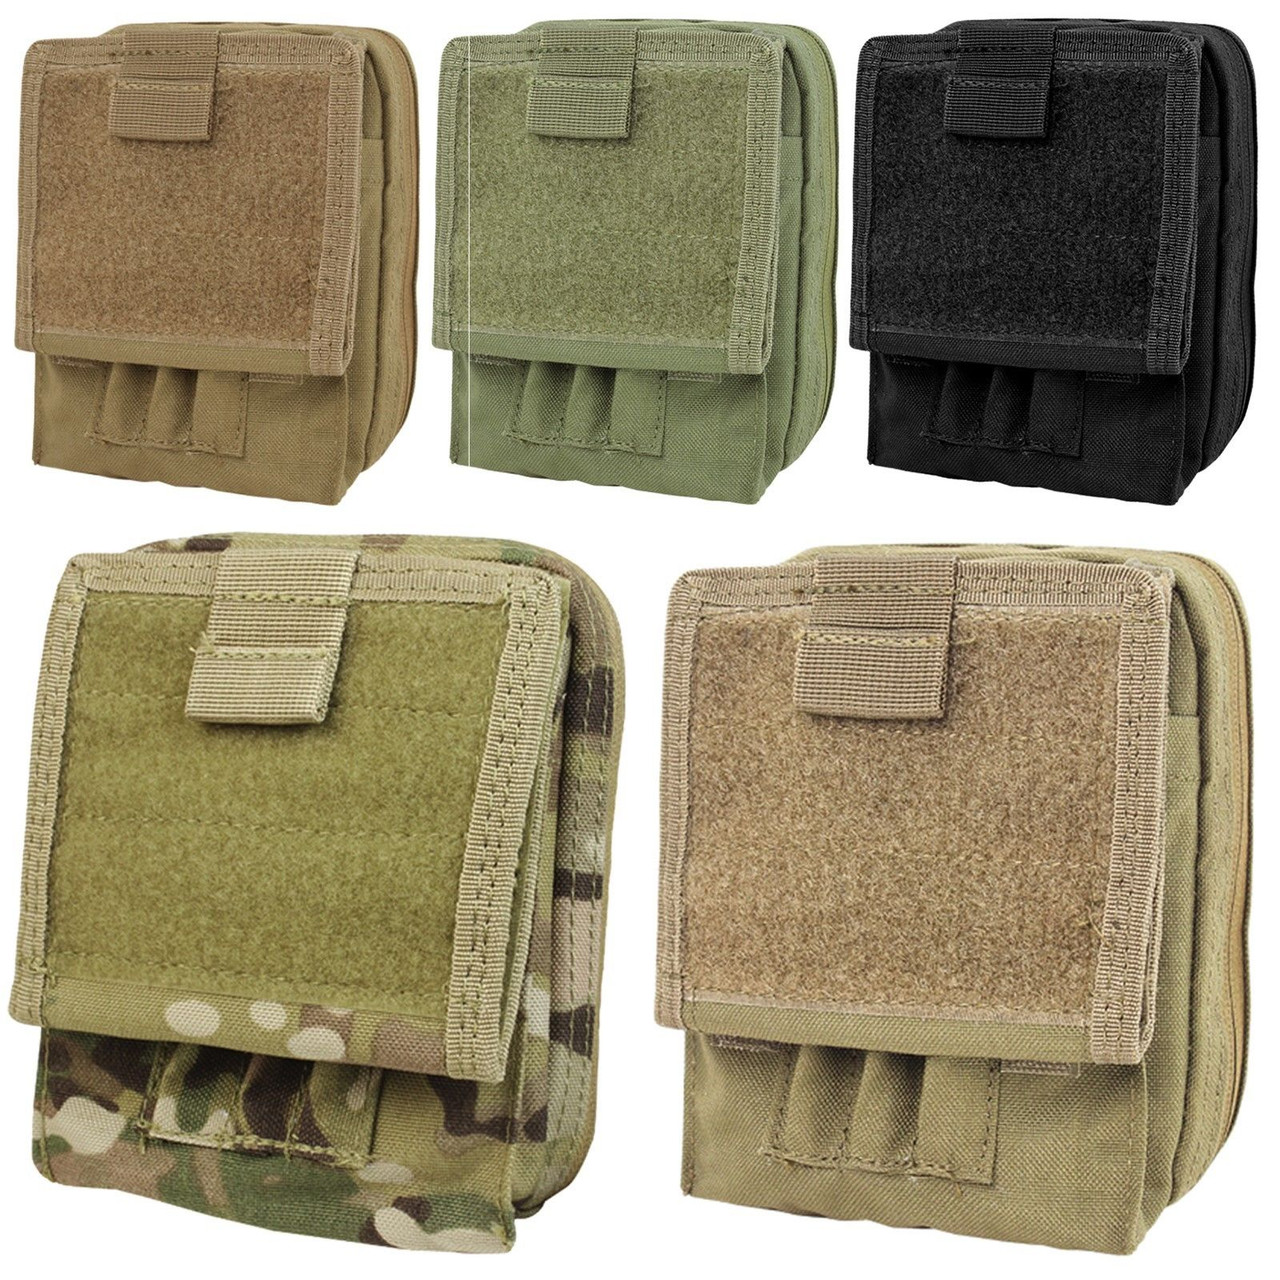 New Condor MA35 Molle Modular Map Admin Chart Document Pouch Case Holster Black 